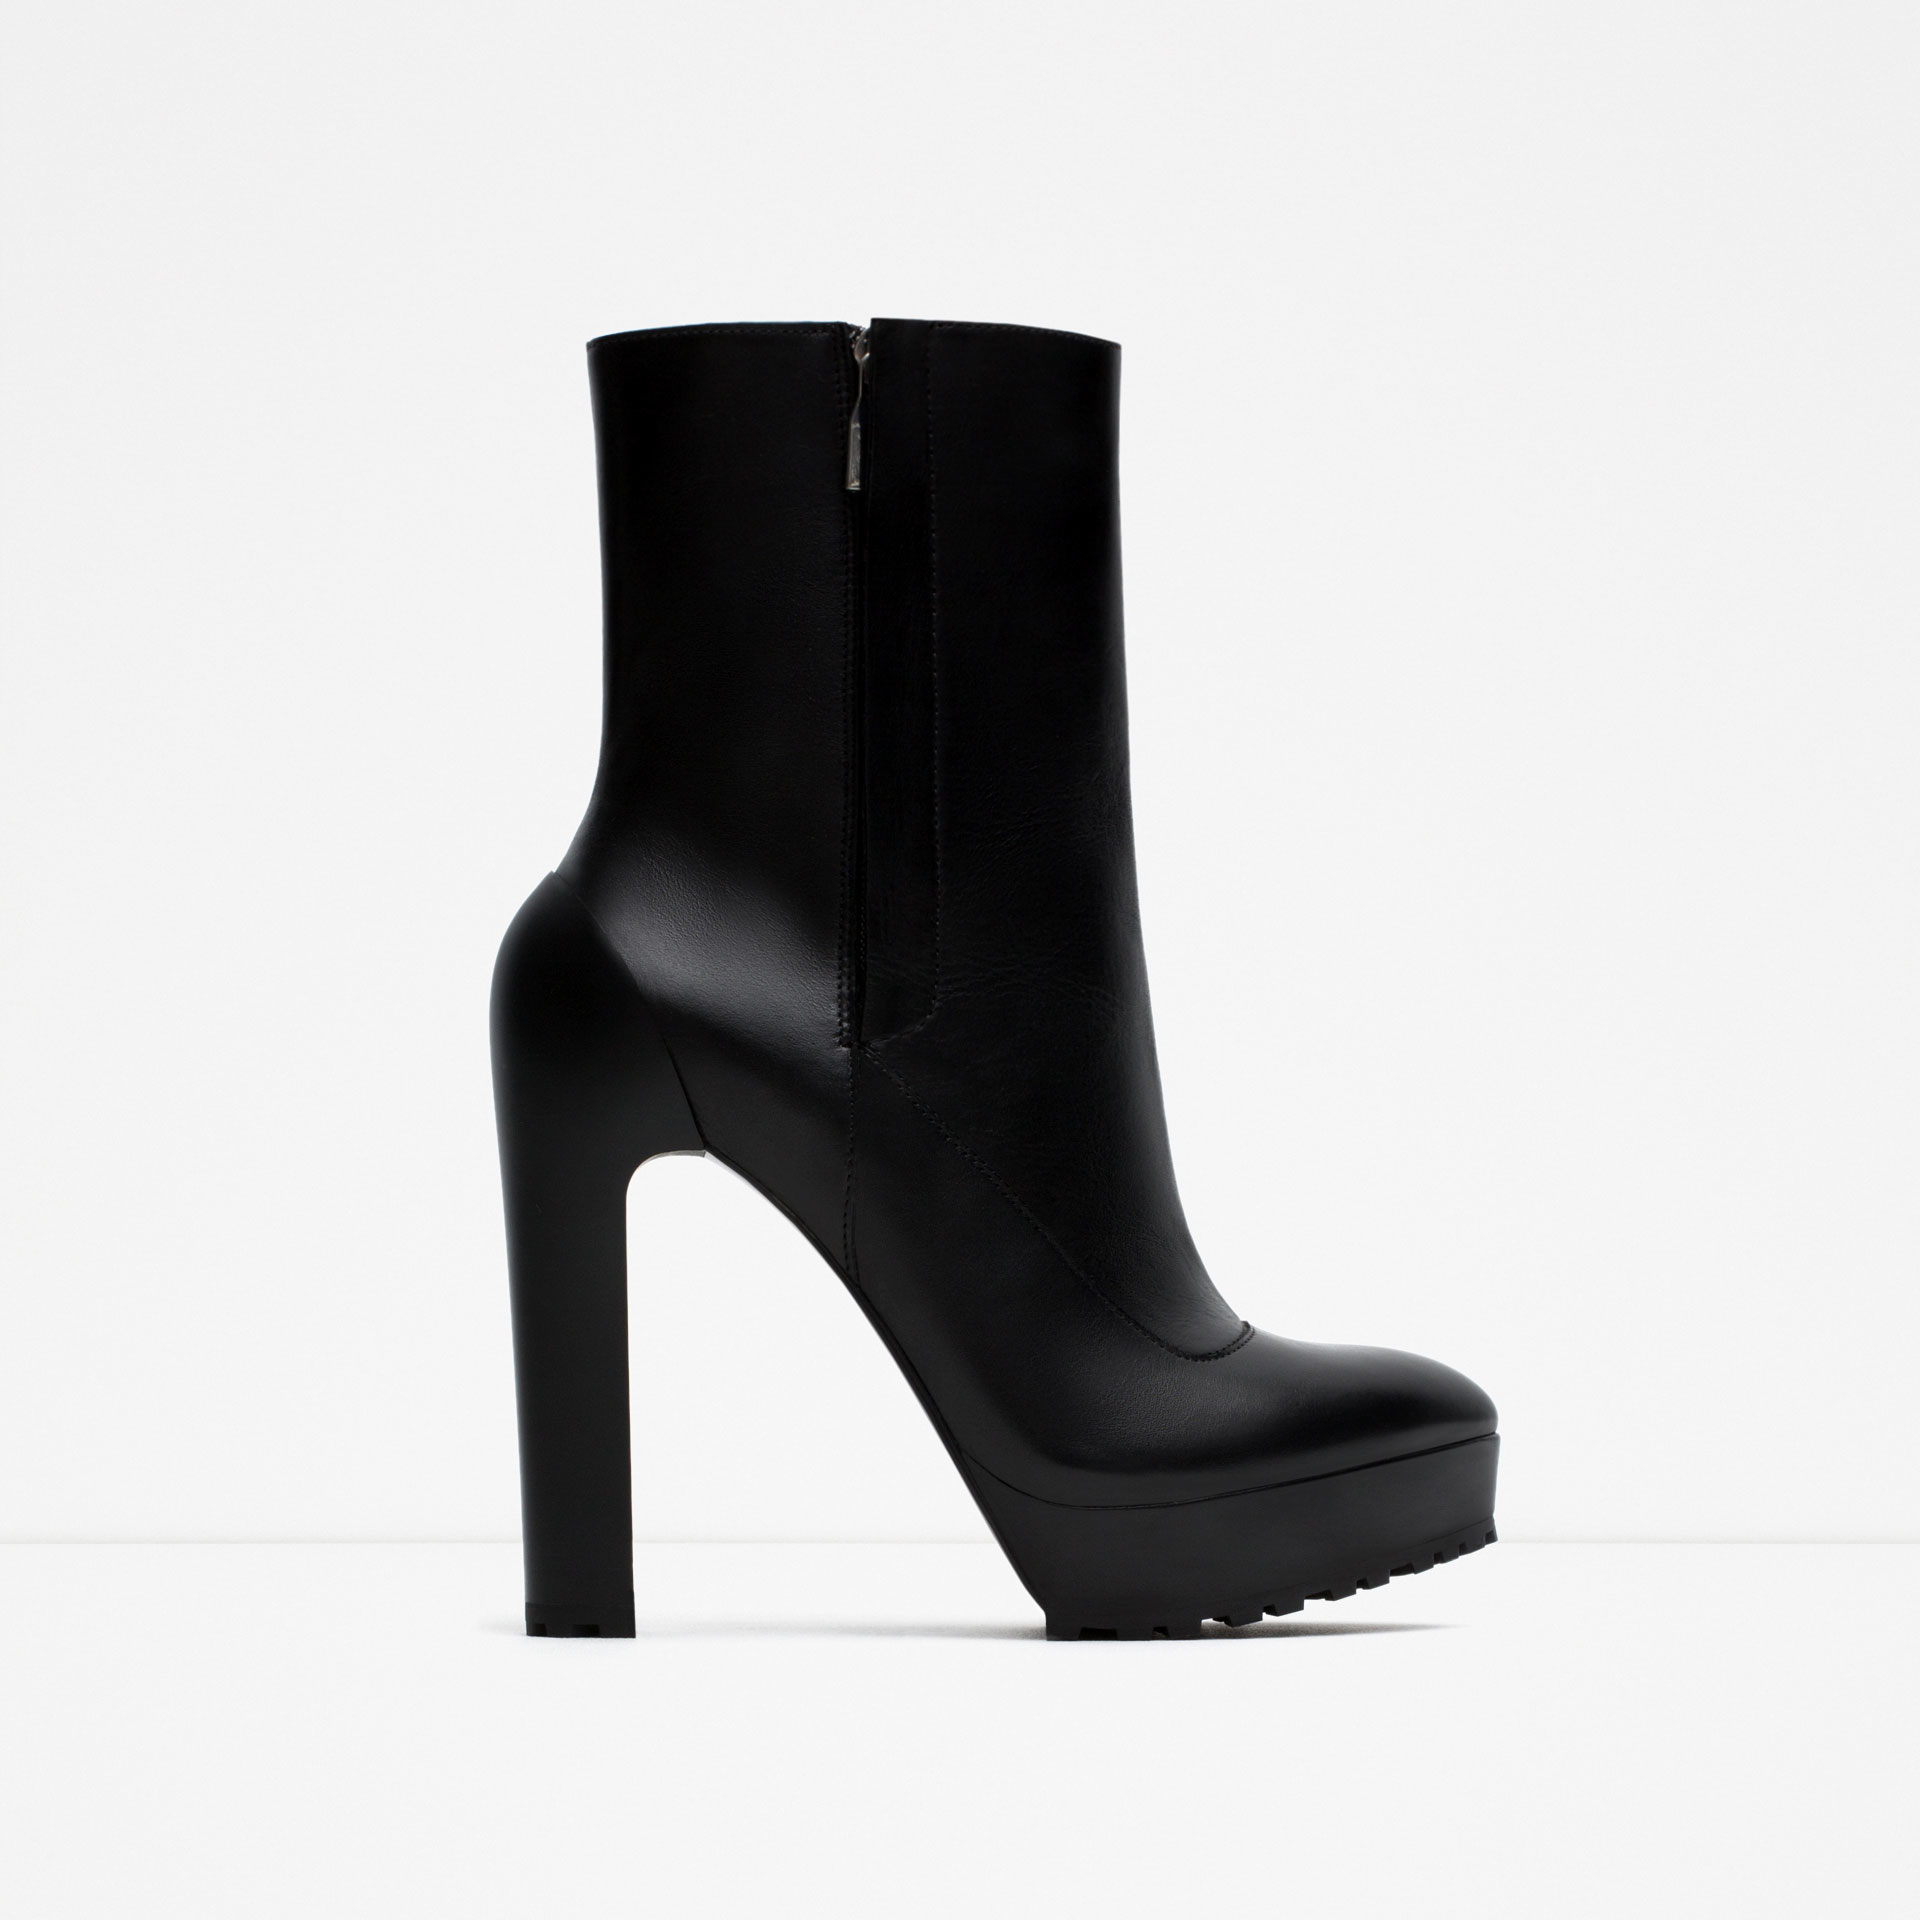 Zara High Heel Leather Ankle Boots in Black | Lyst